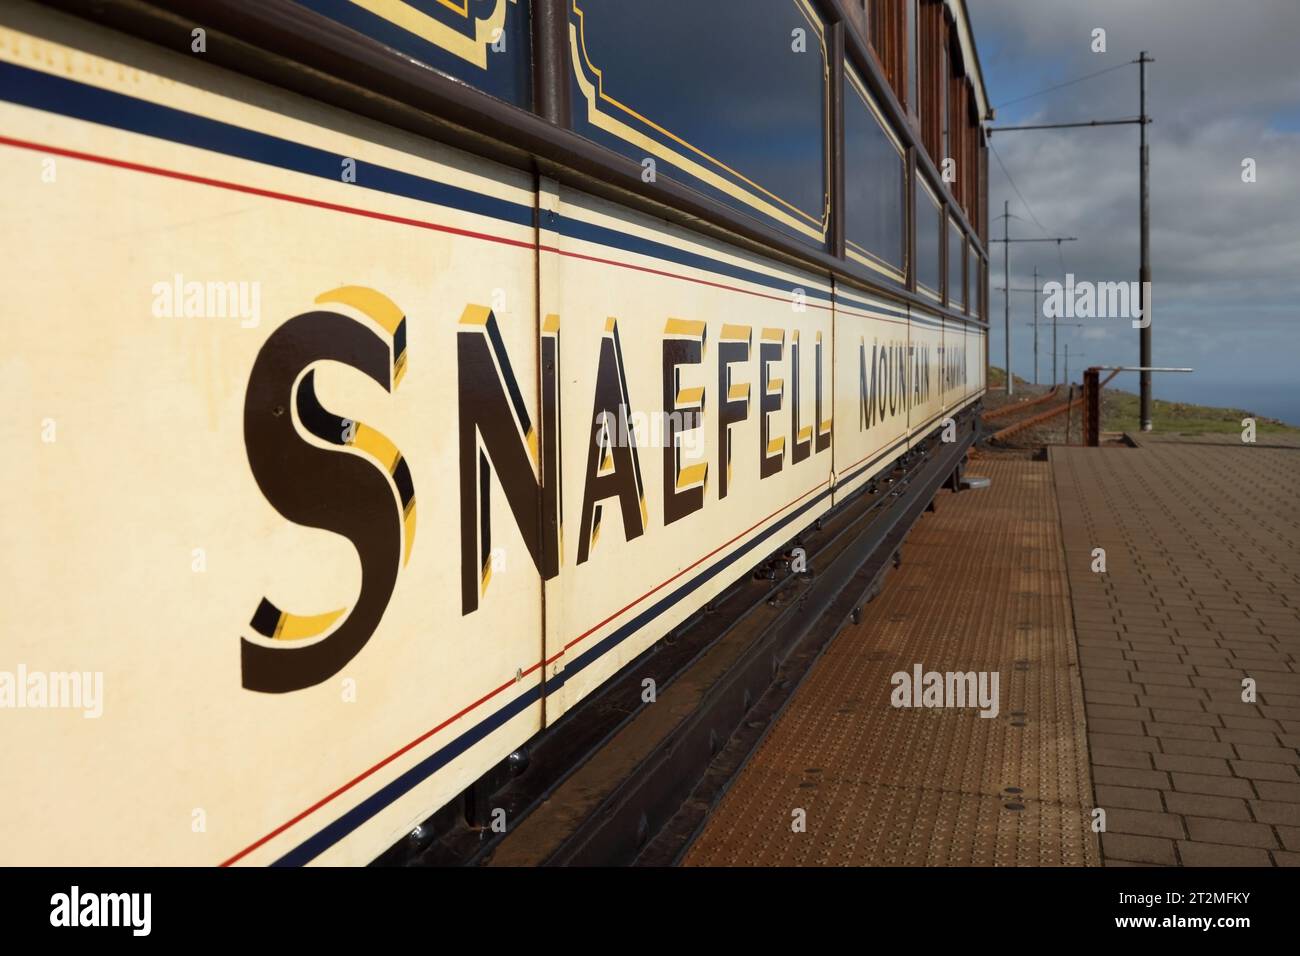 Snaefell Mountain Railway tram number 1 at Snaefell station, Isle of Man. Stock Photo